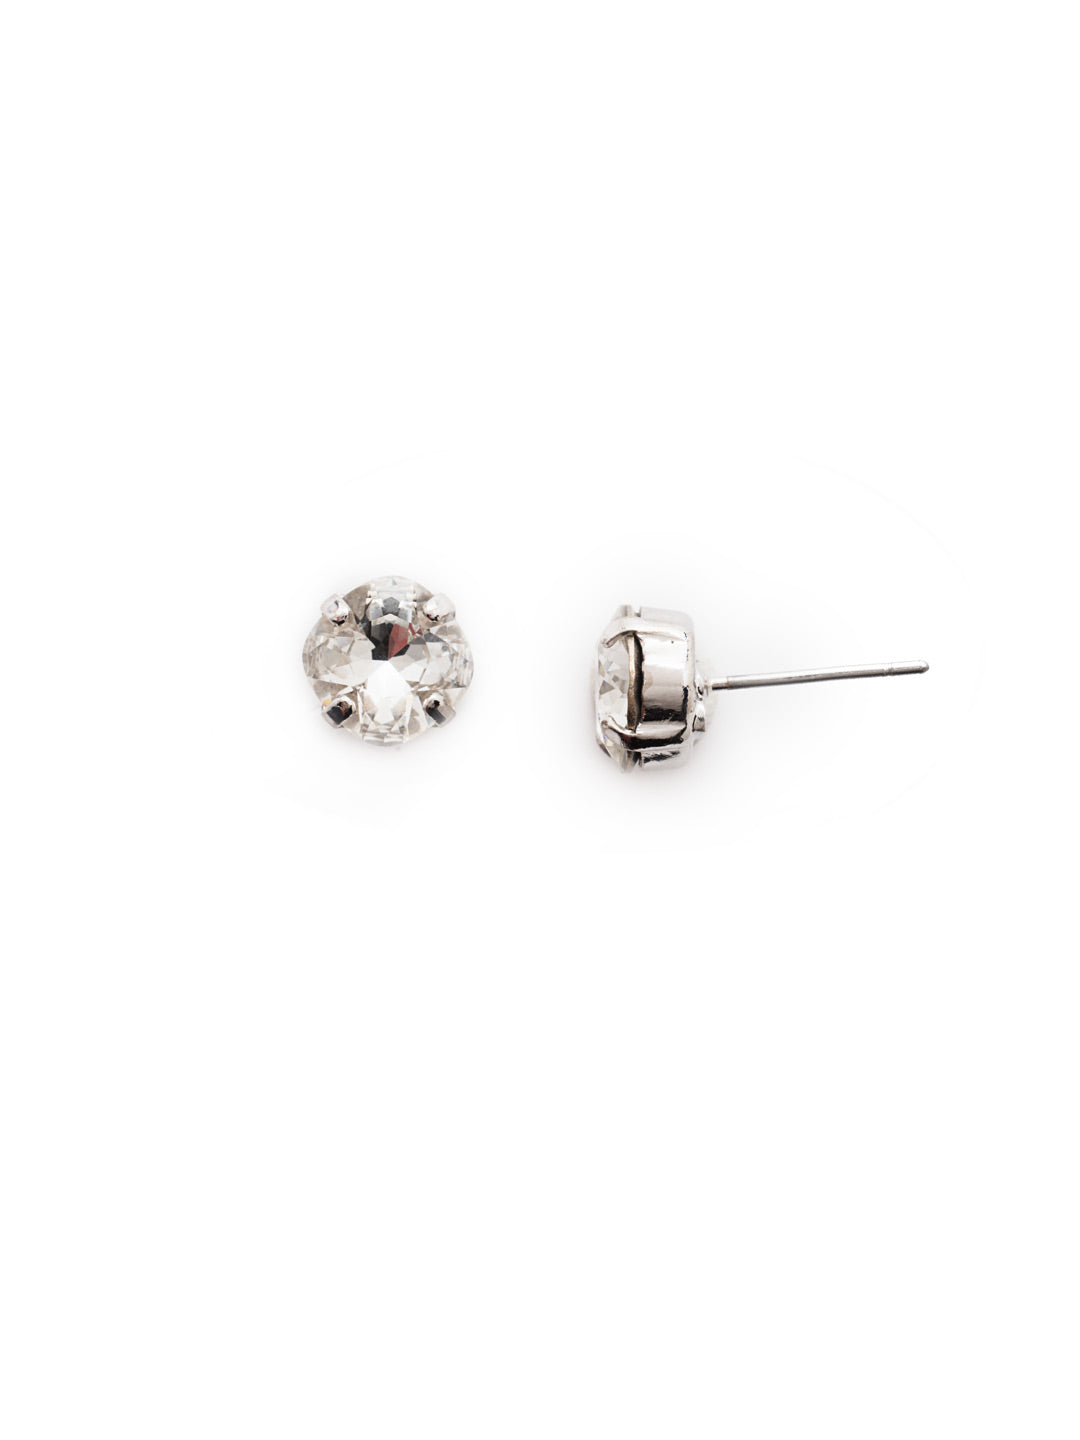 Winslow Stud Earrings - 4EET12RHCRY - <p>Our Winslow Stud Earrings are multi-faceted sparklers. They're must-haves crystal fans can wear every day. From Sorrelli's Crystal collection in our Palladium Silver-tone finish.</p>